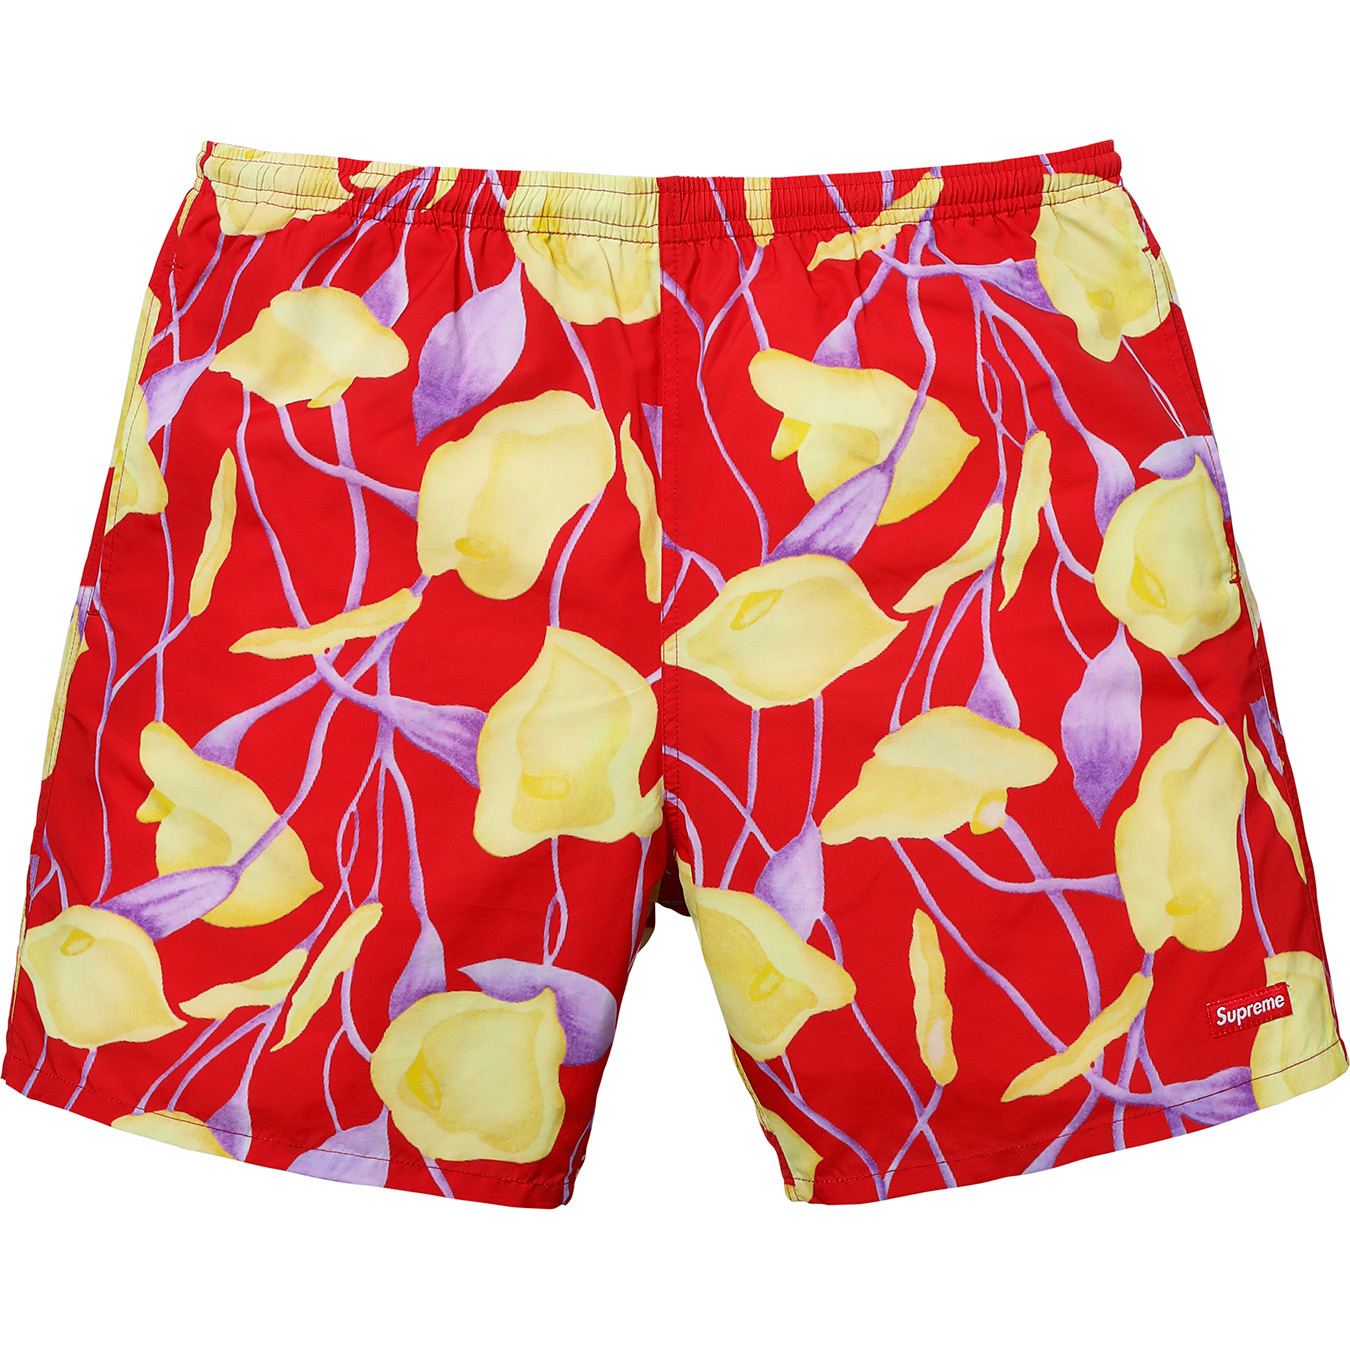 Supreme Nylon Water Short Red Floral Men's - SS18 - US